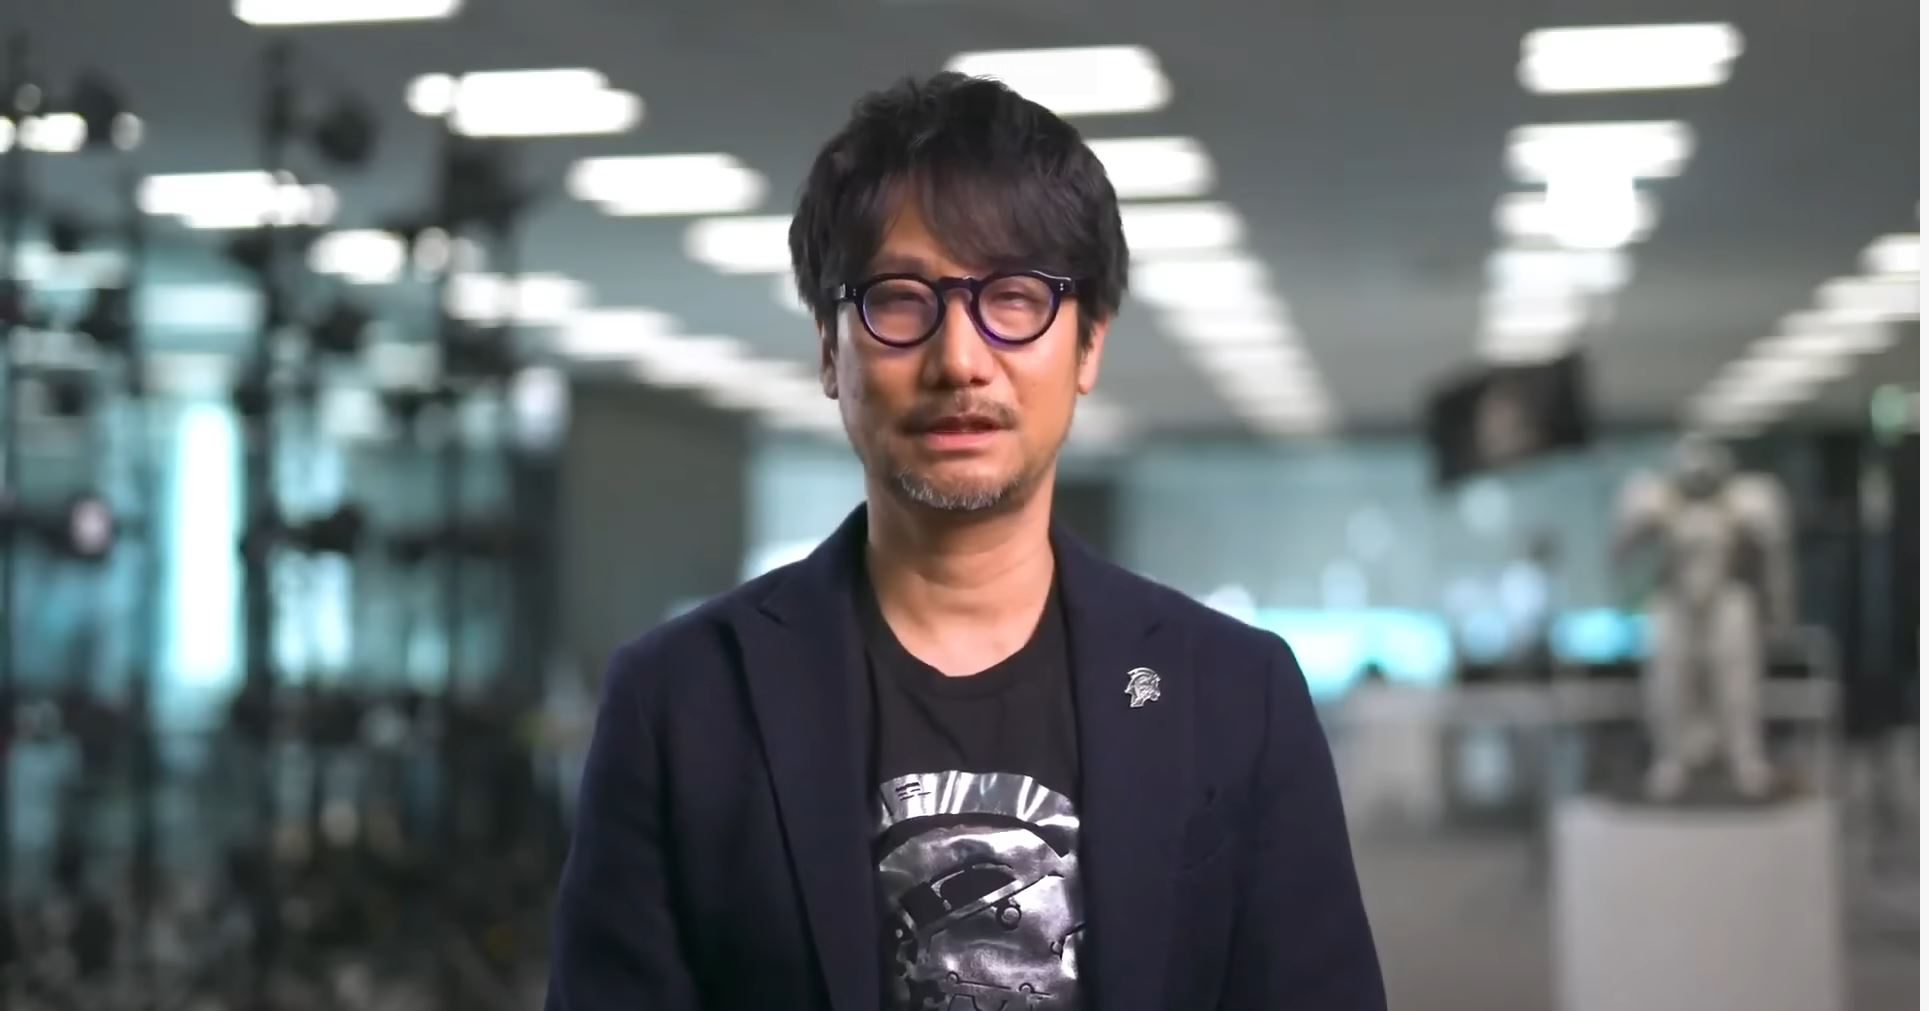 Every Connection Between Hideo Kojima's OD & Silent Hill (So Far)